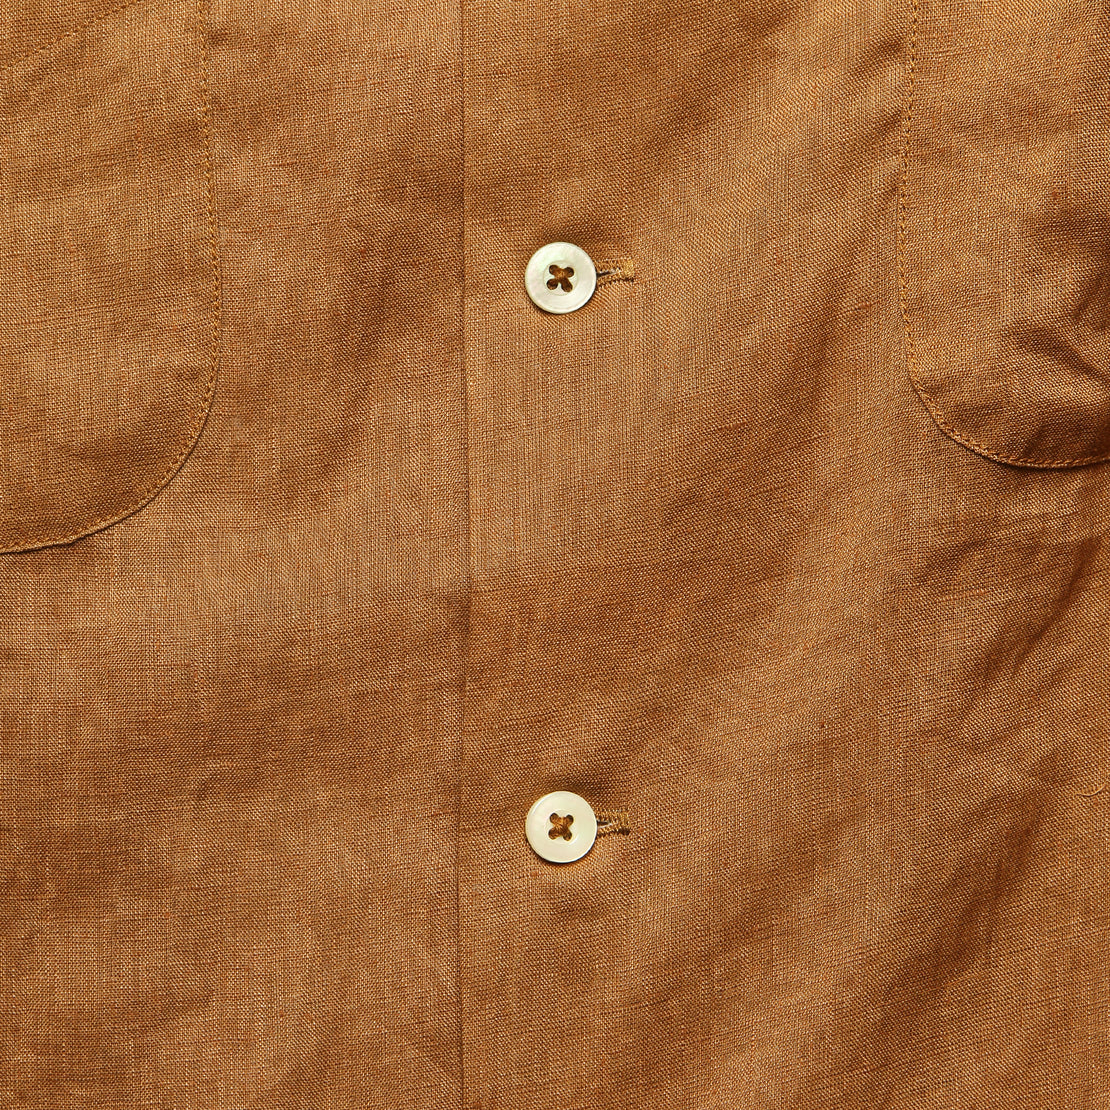 Vacation Shirt - Brown - Monitaly - STAG Provisions - Tops - S/S Woven - Solid